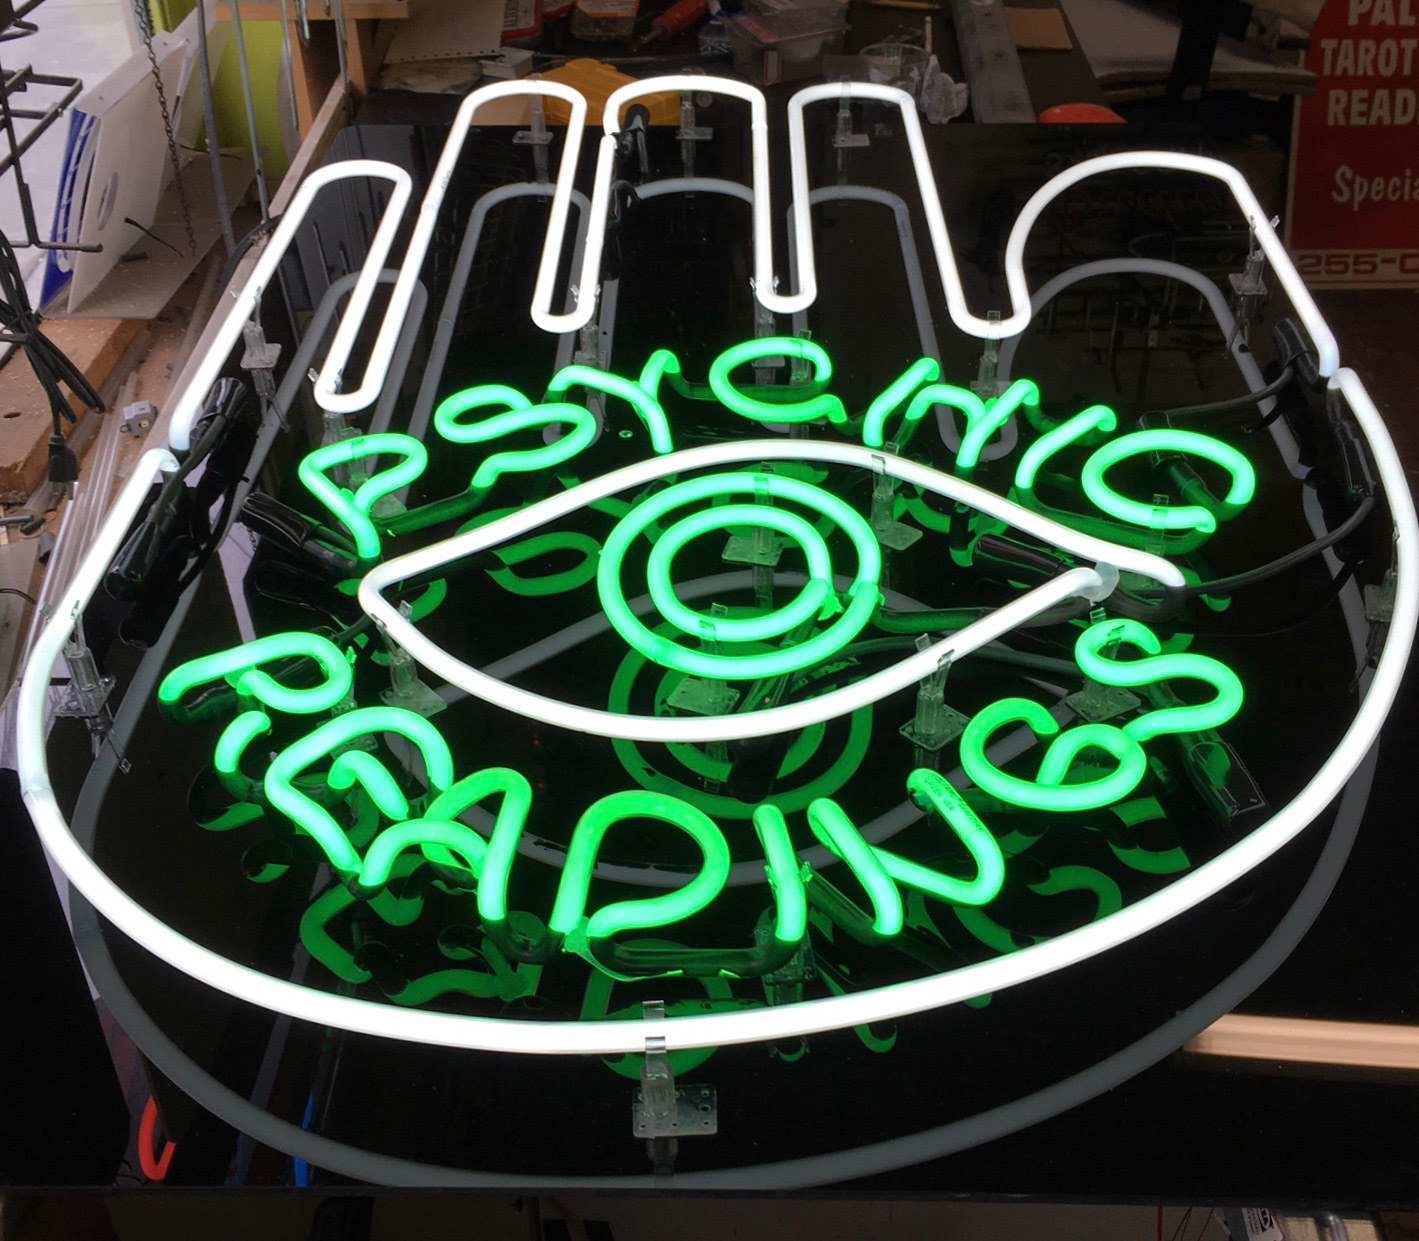 Psychic Readings Neon Sign